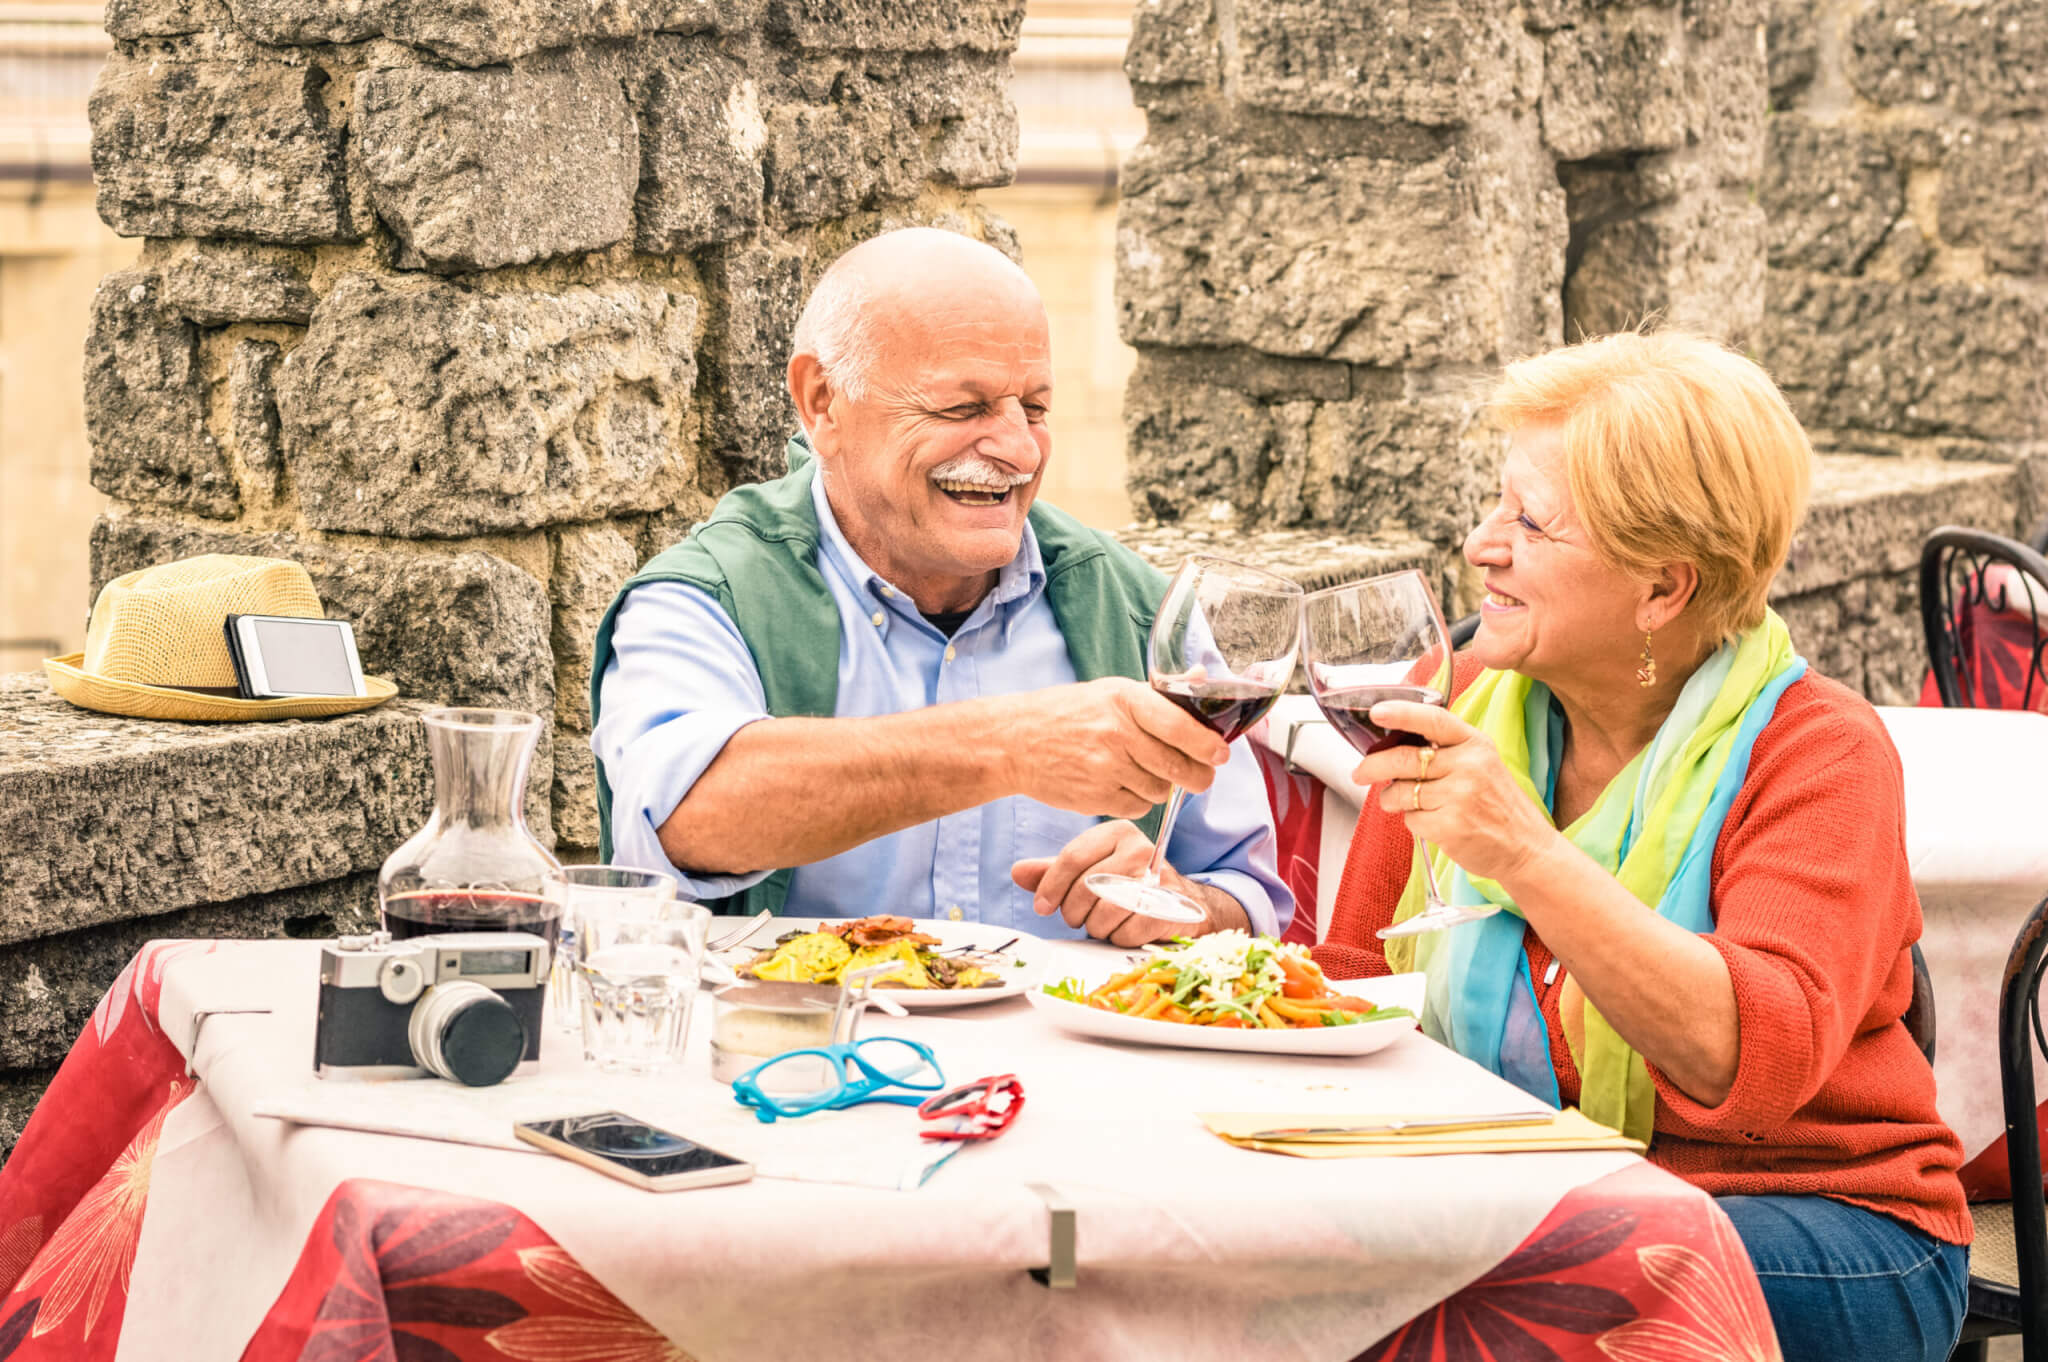 Senior couple having fun eating at restaurant on traveling - Mature man and woman wife on active elderly vacation - Happy retirement concept with retired people together - Warm cloudy day color tones